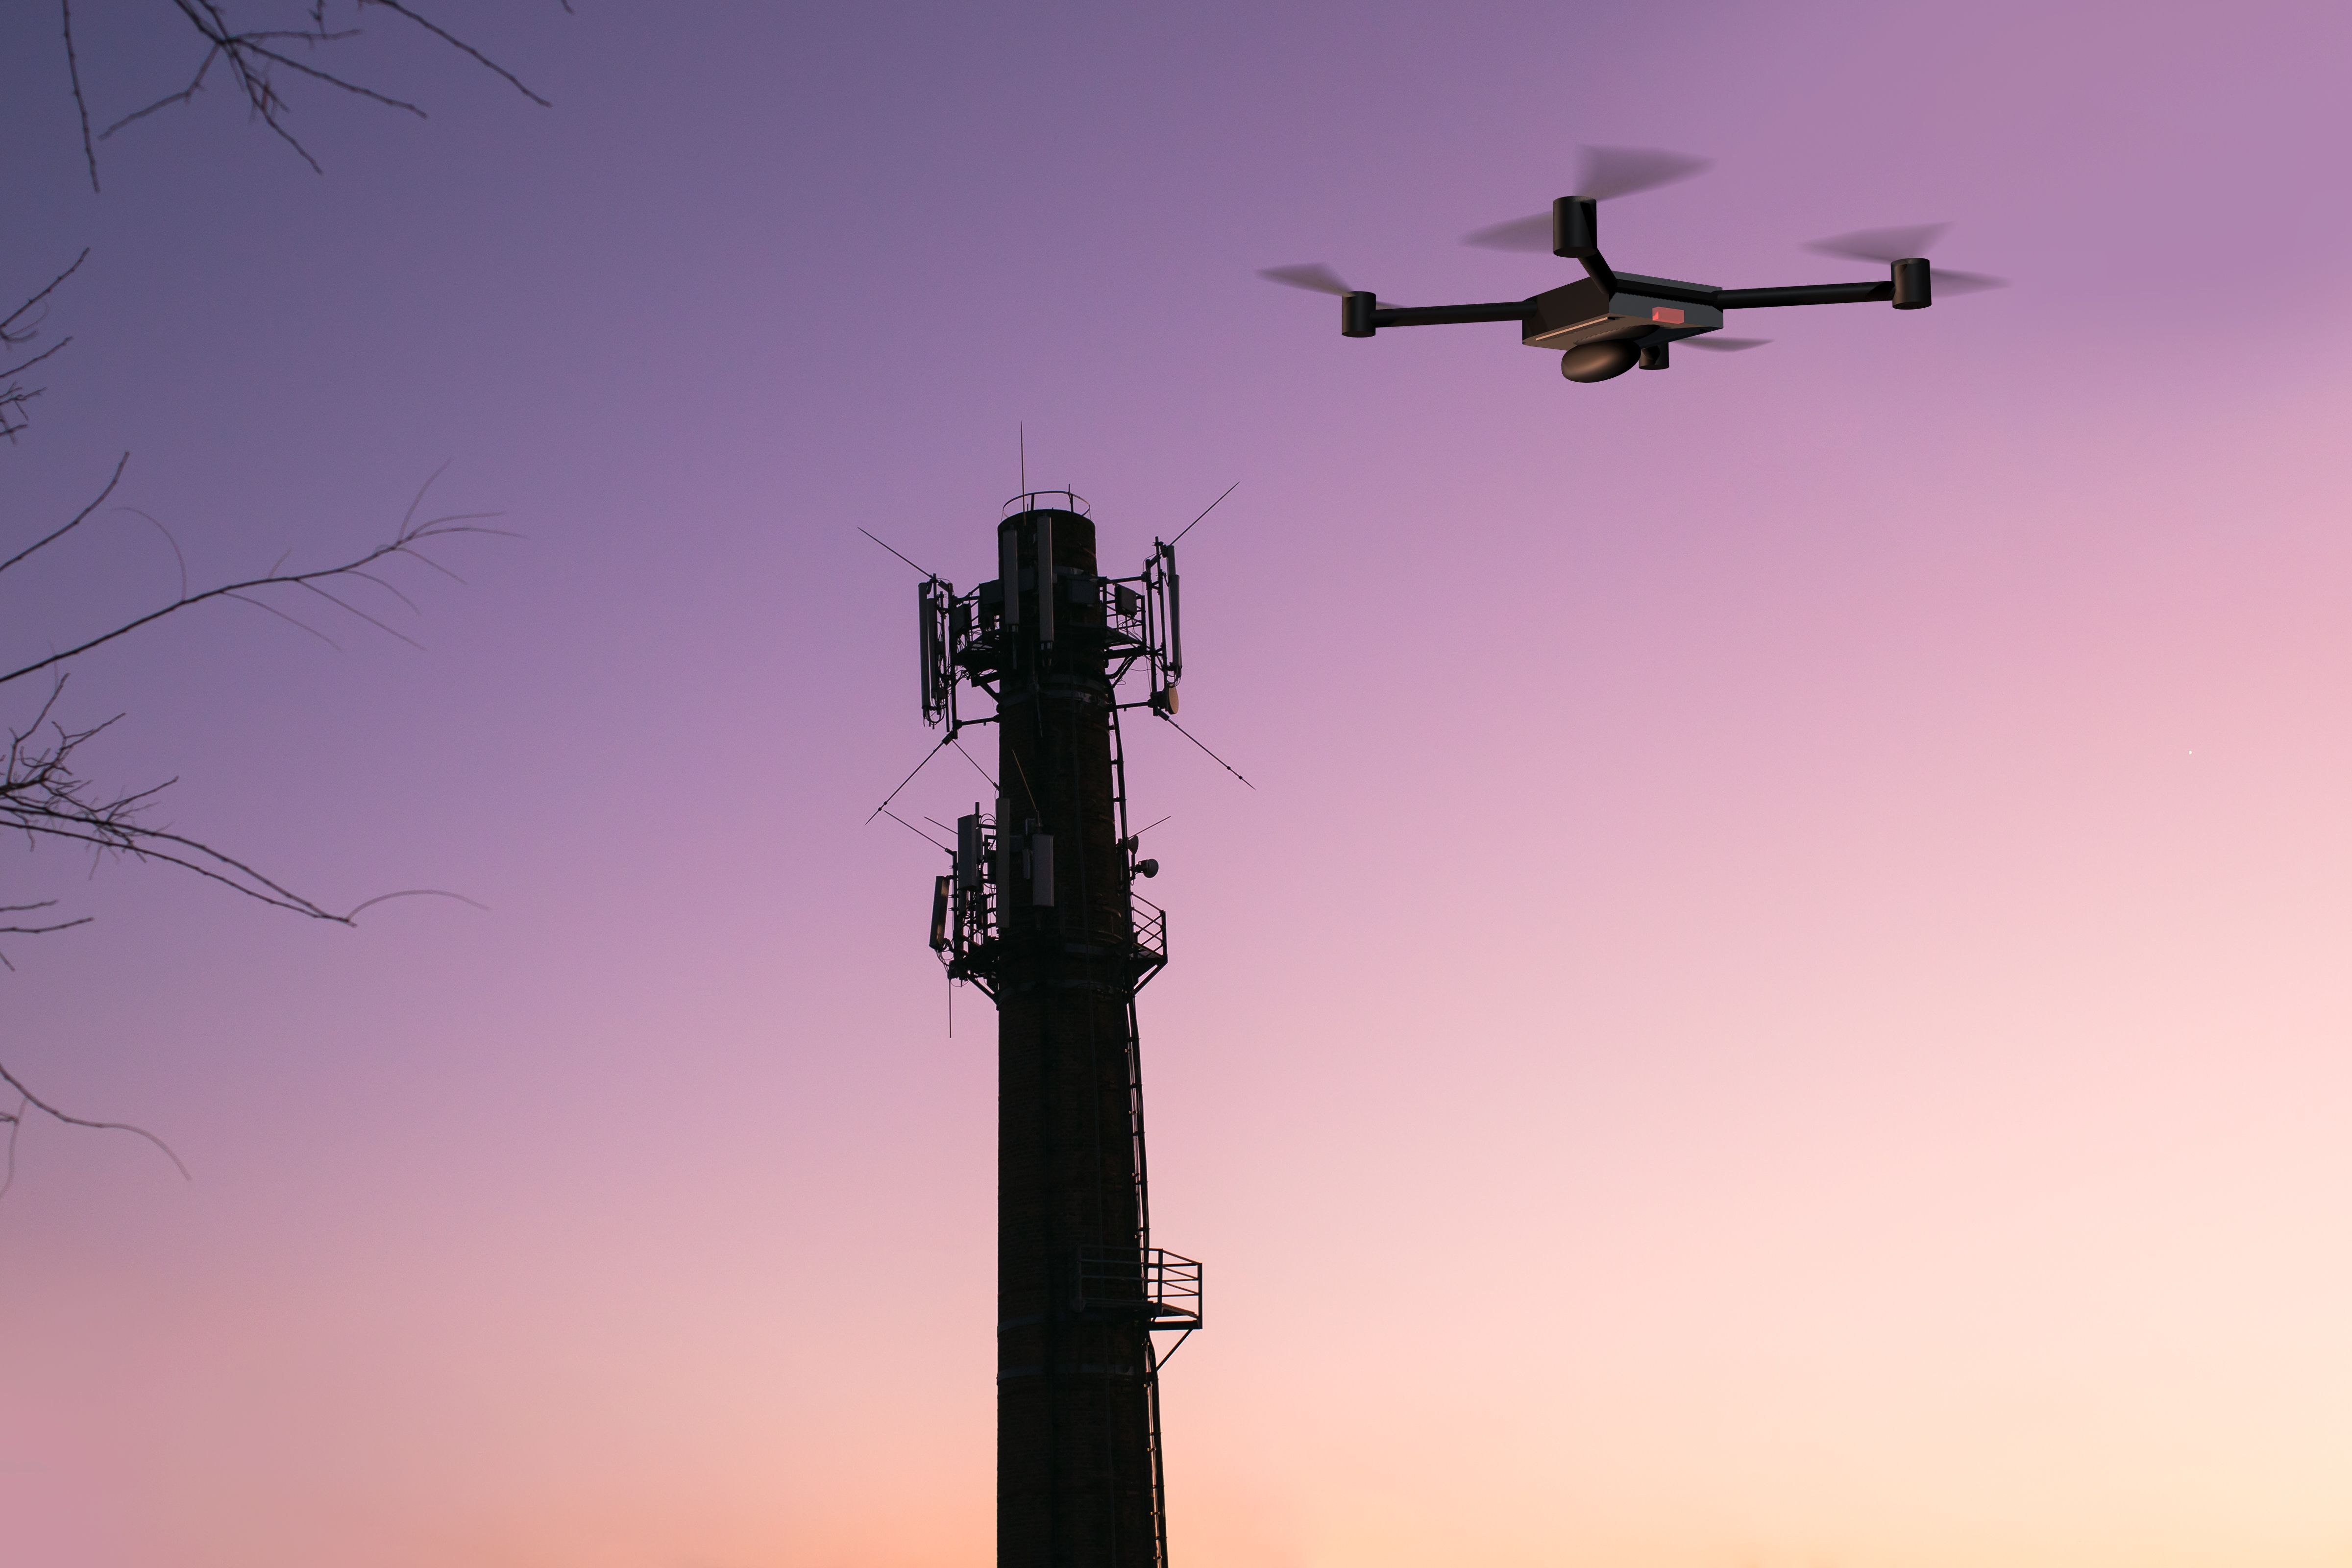 Manual drone near a cell tower in front of a pink sunset